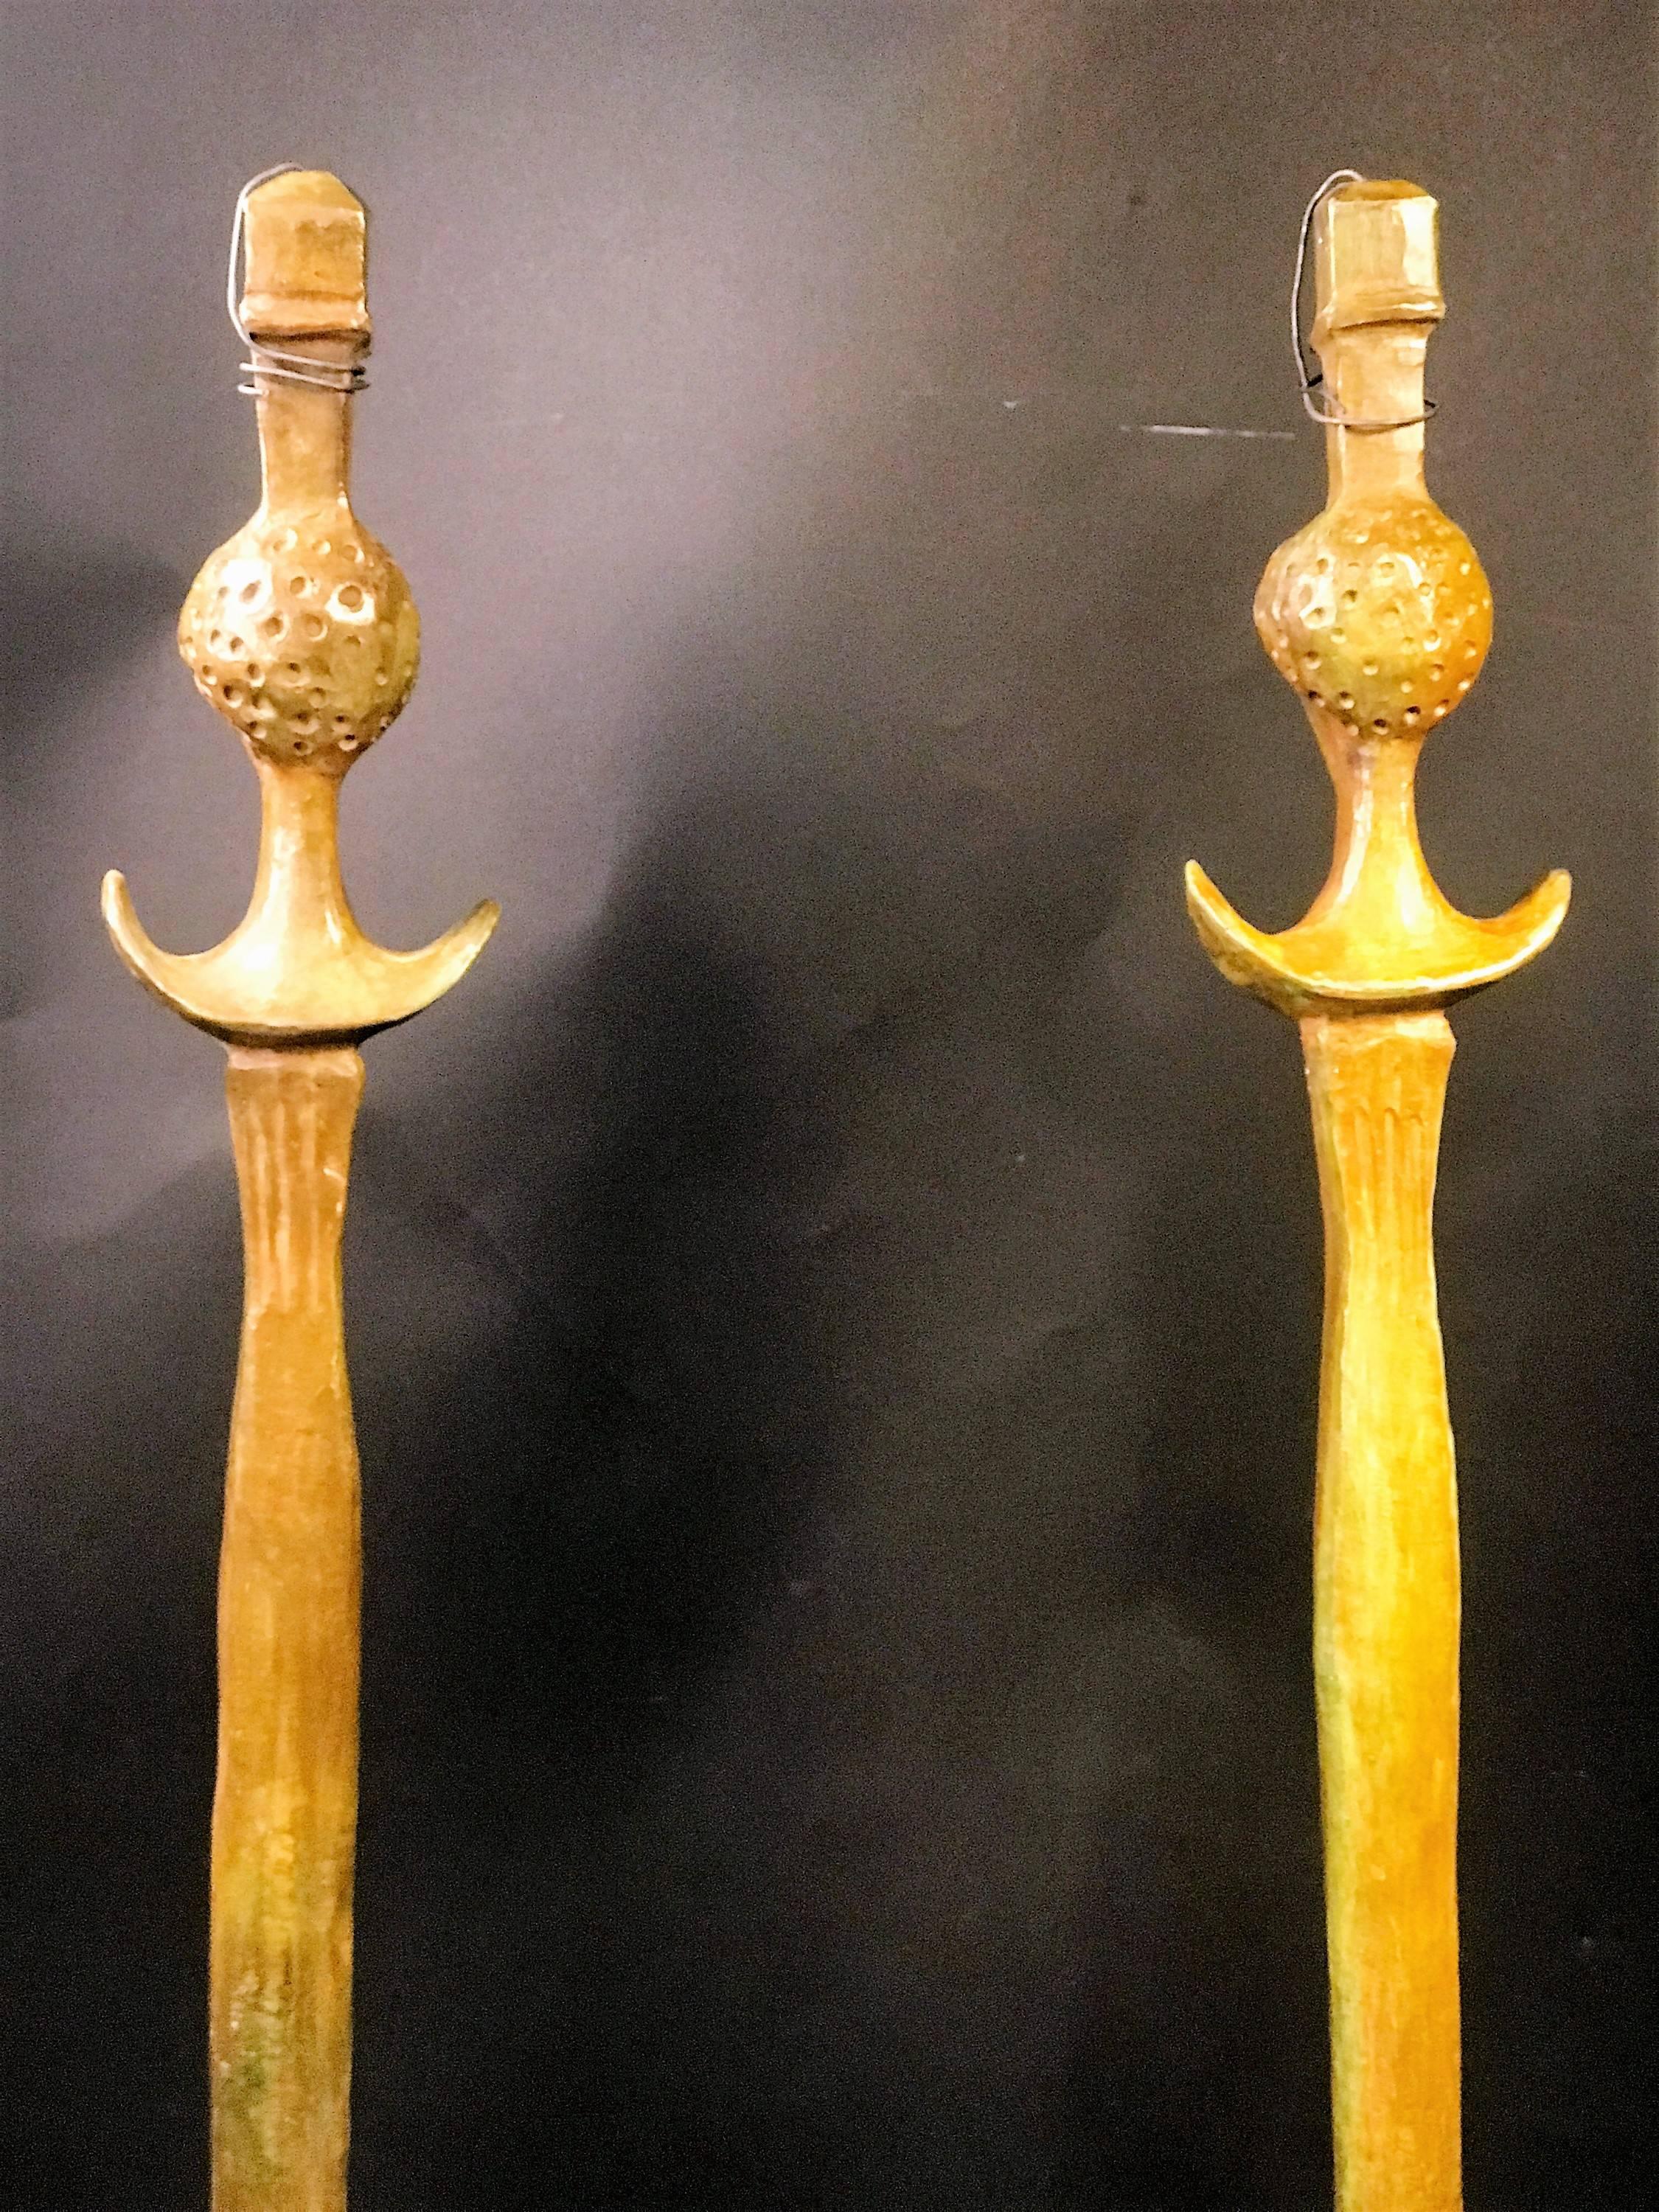 Monumental Pair of Bronze 'Tete De Femme' Floor Lamps after Giacometti In Excellent Condition For Sale In Mount Penn, PA